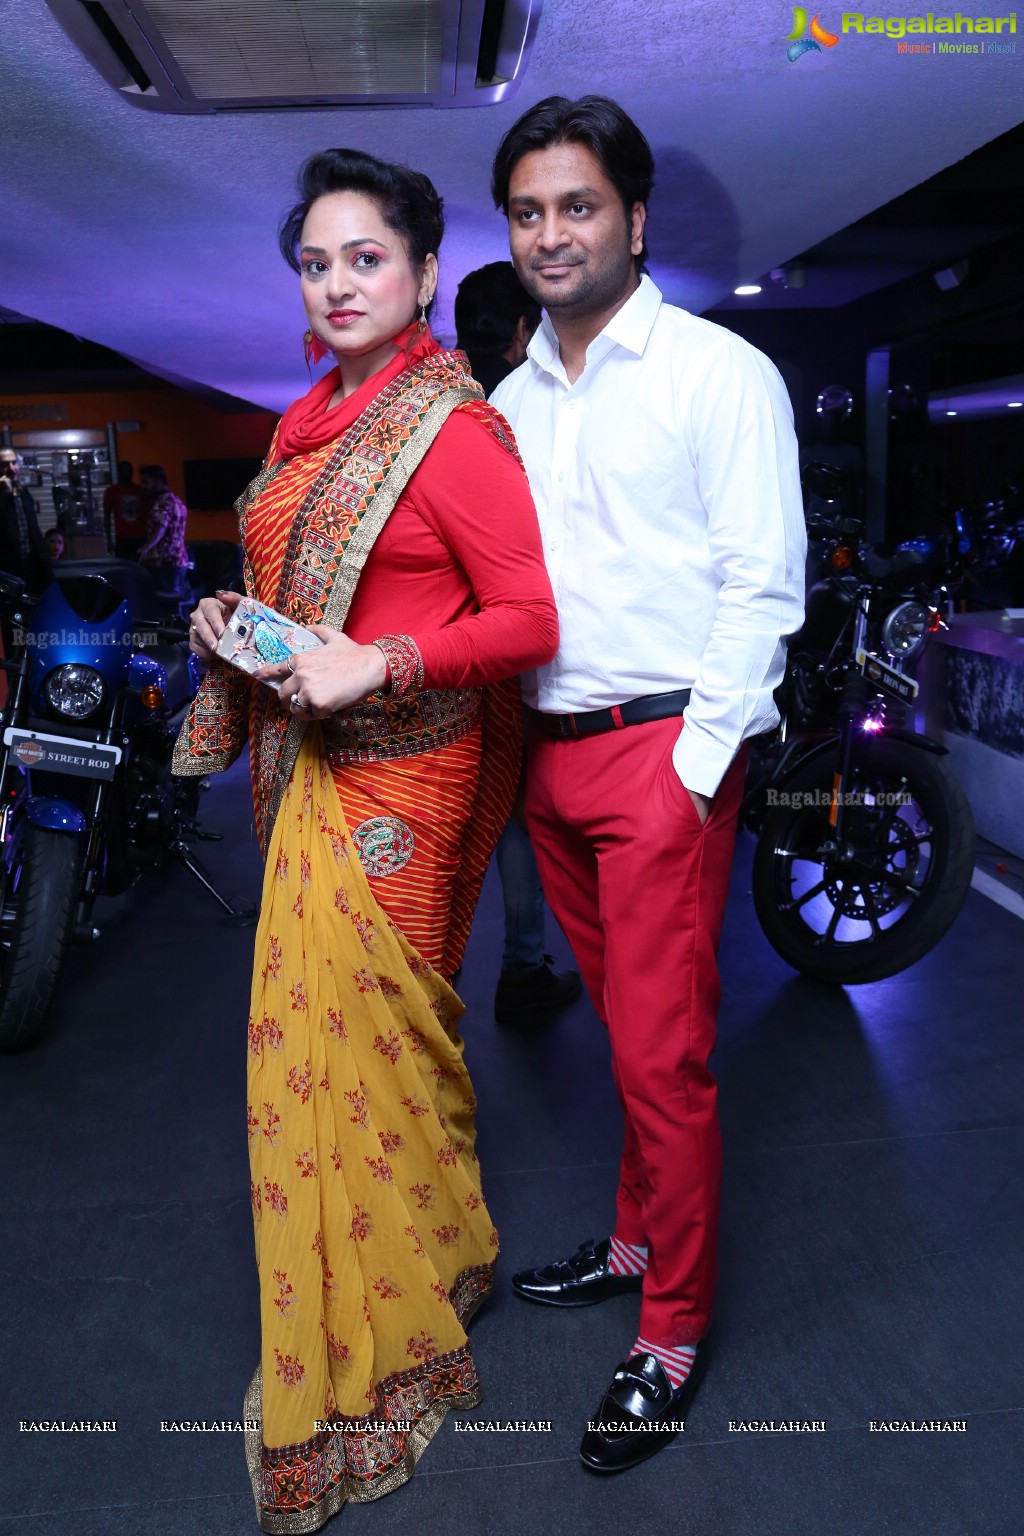 The Harley Fashion Evening - An Evening of Fashion, Glamour and Motor Bikes at Harley Davidson Showroom, Hyderabad